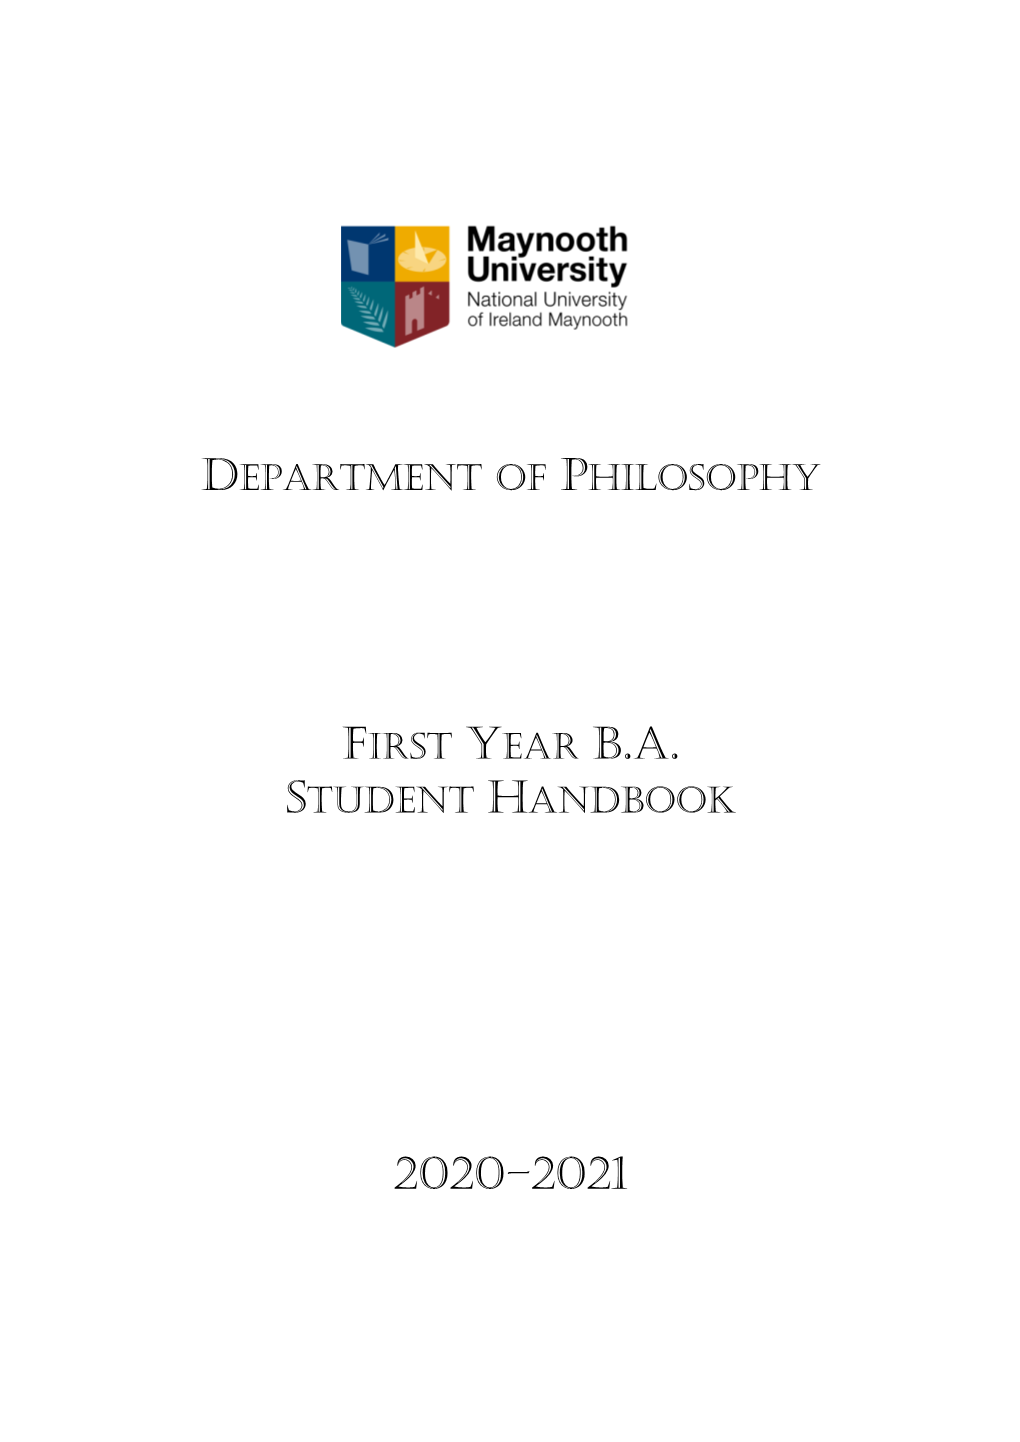 Department of Philosophy First Year B.A. Student